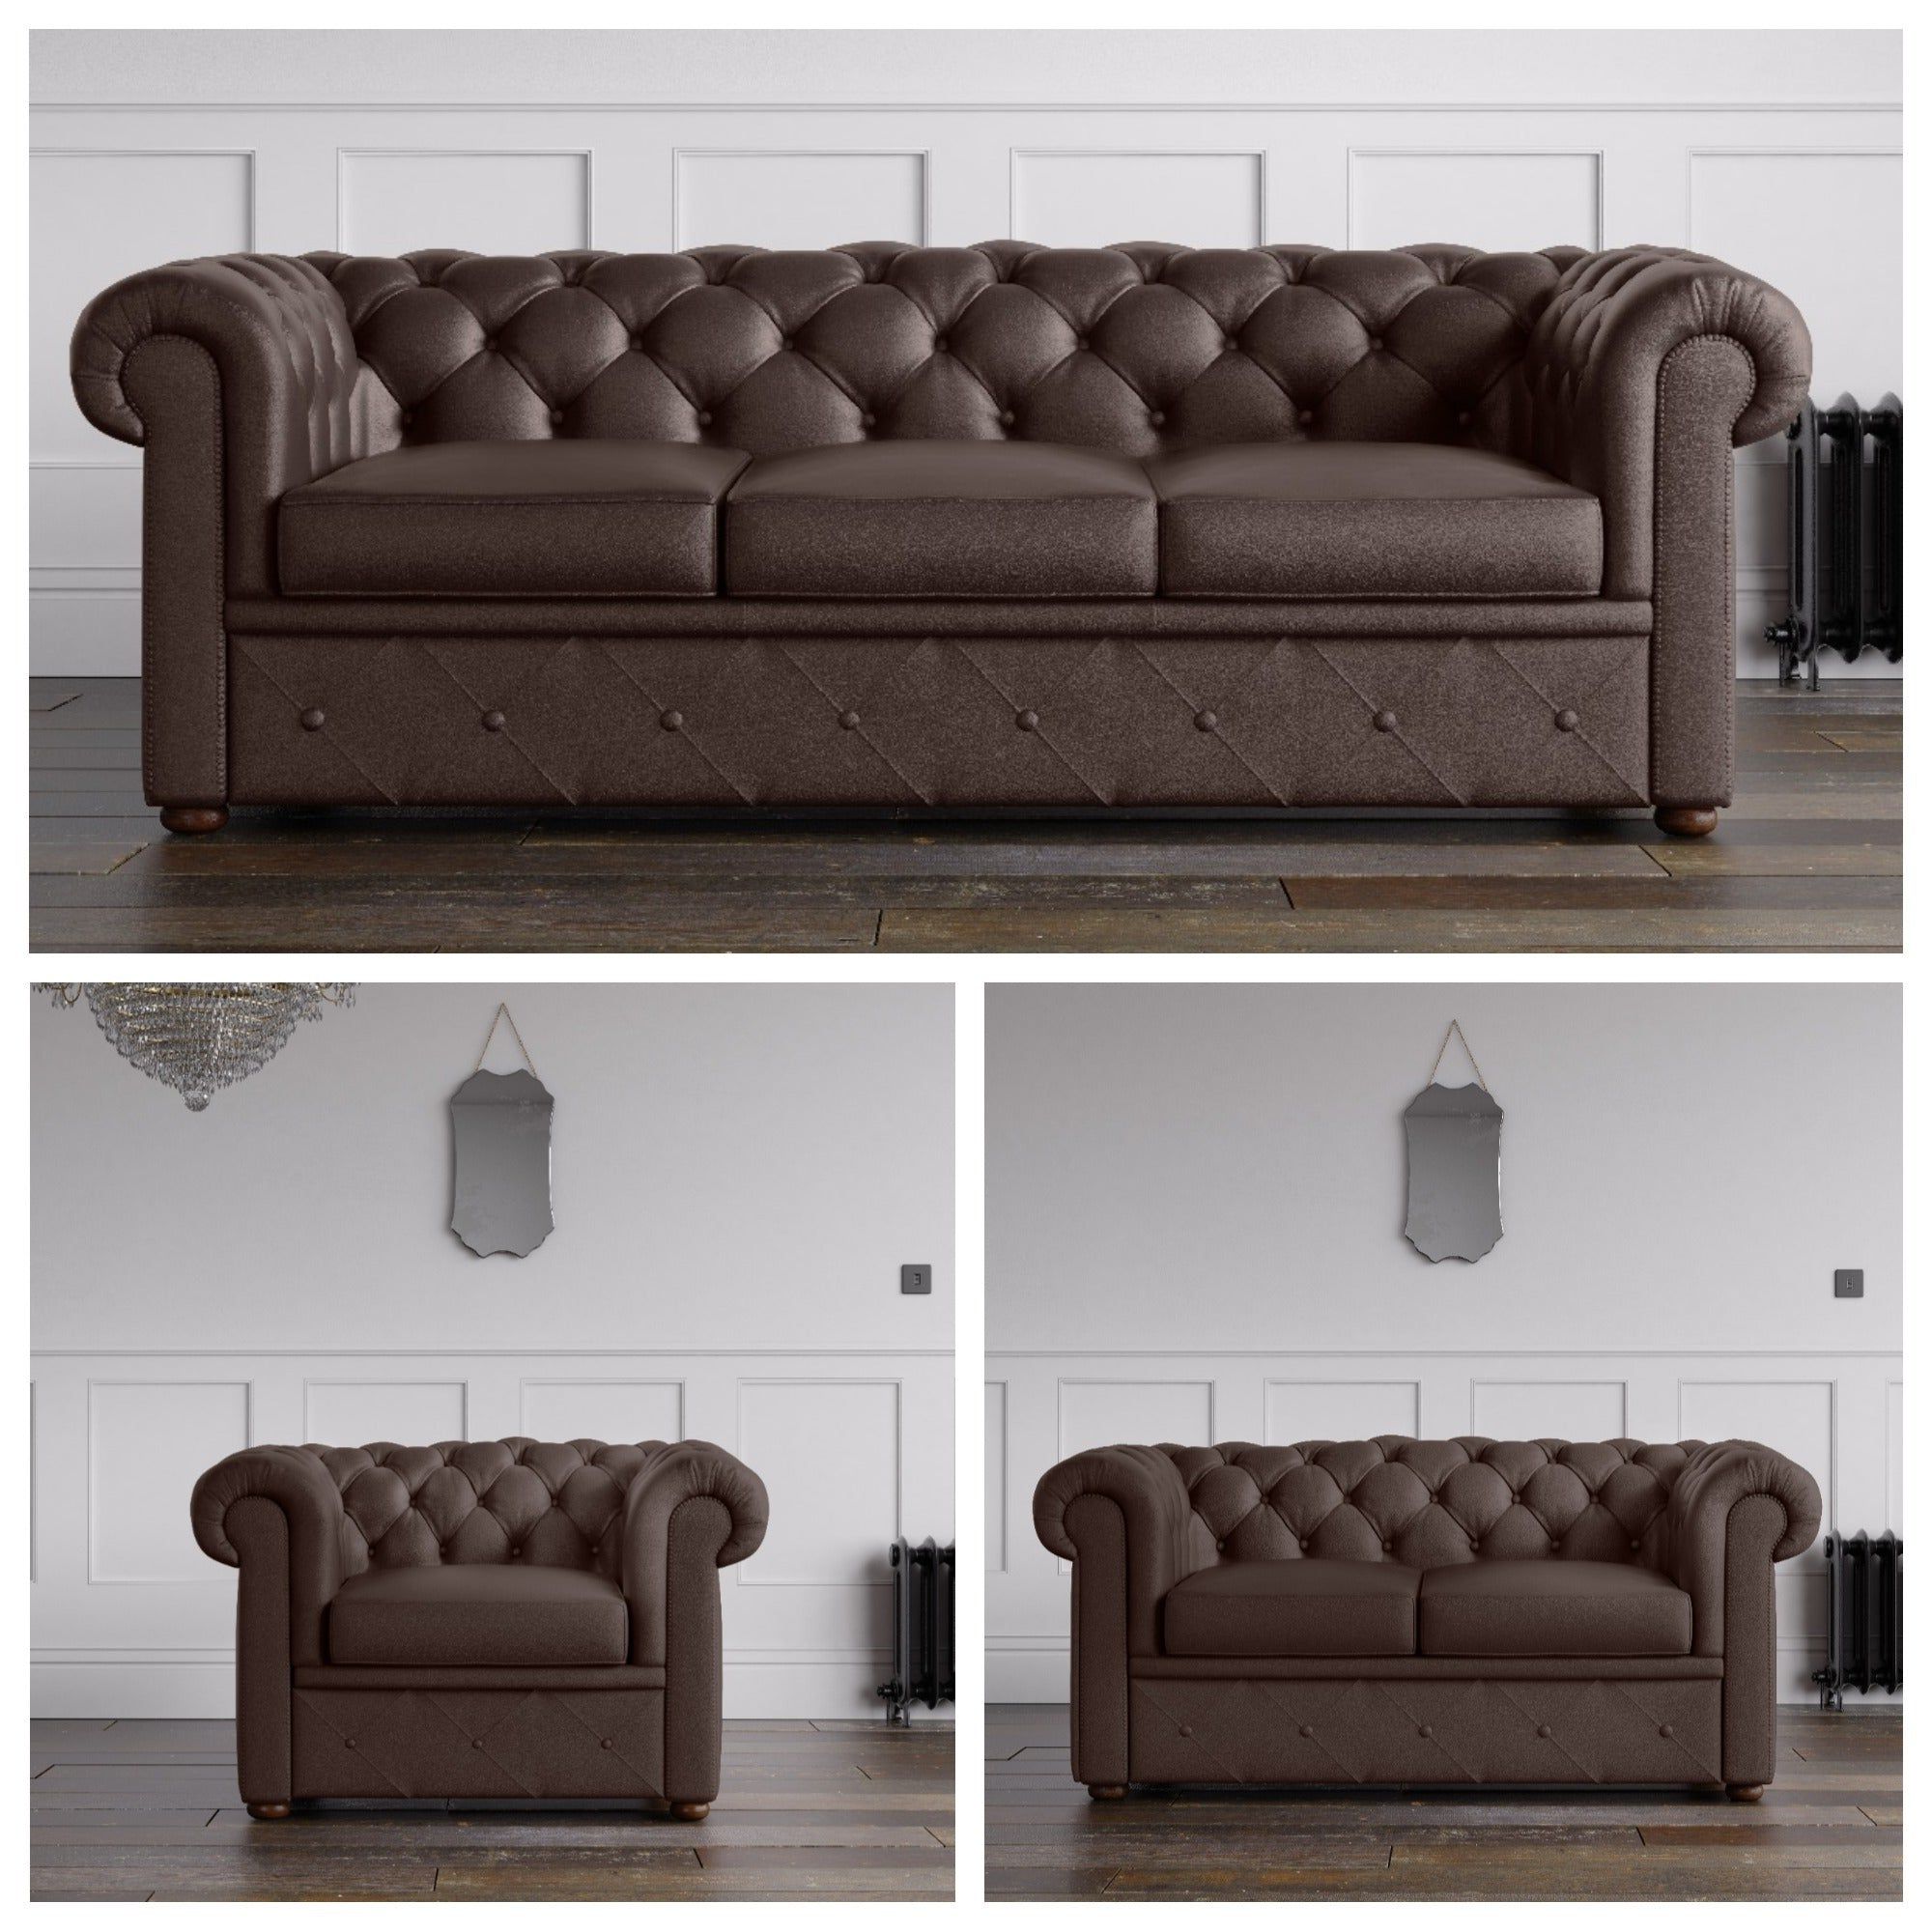 Faux Leather Sofas In Chocolate Brown Throughout Most Recently Released Chesterfield Faux Leather Sofa Chocolate – Endure Fabrics (Photo 1 of 15)